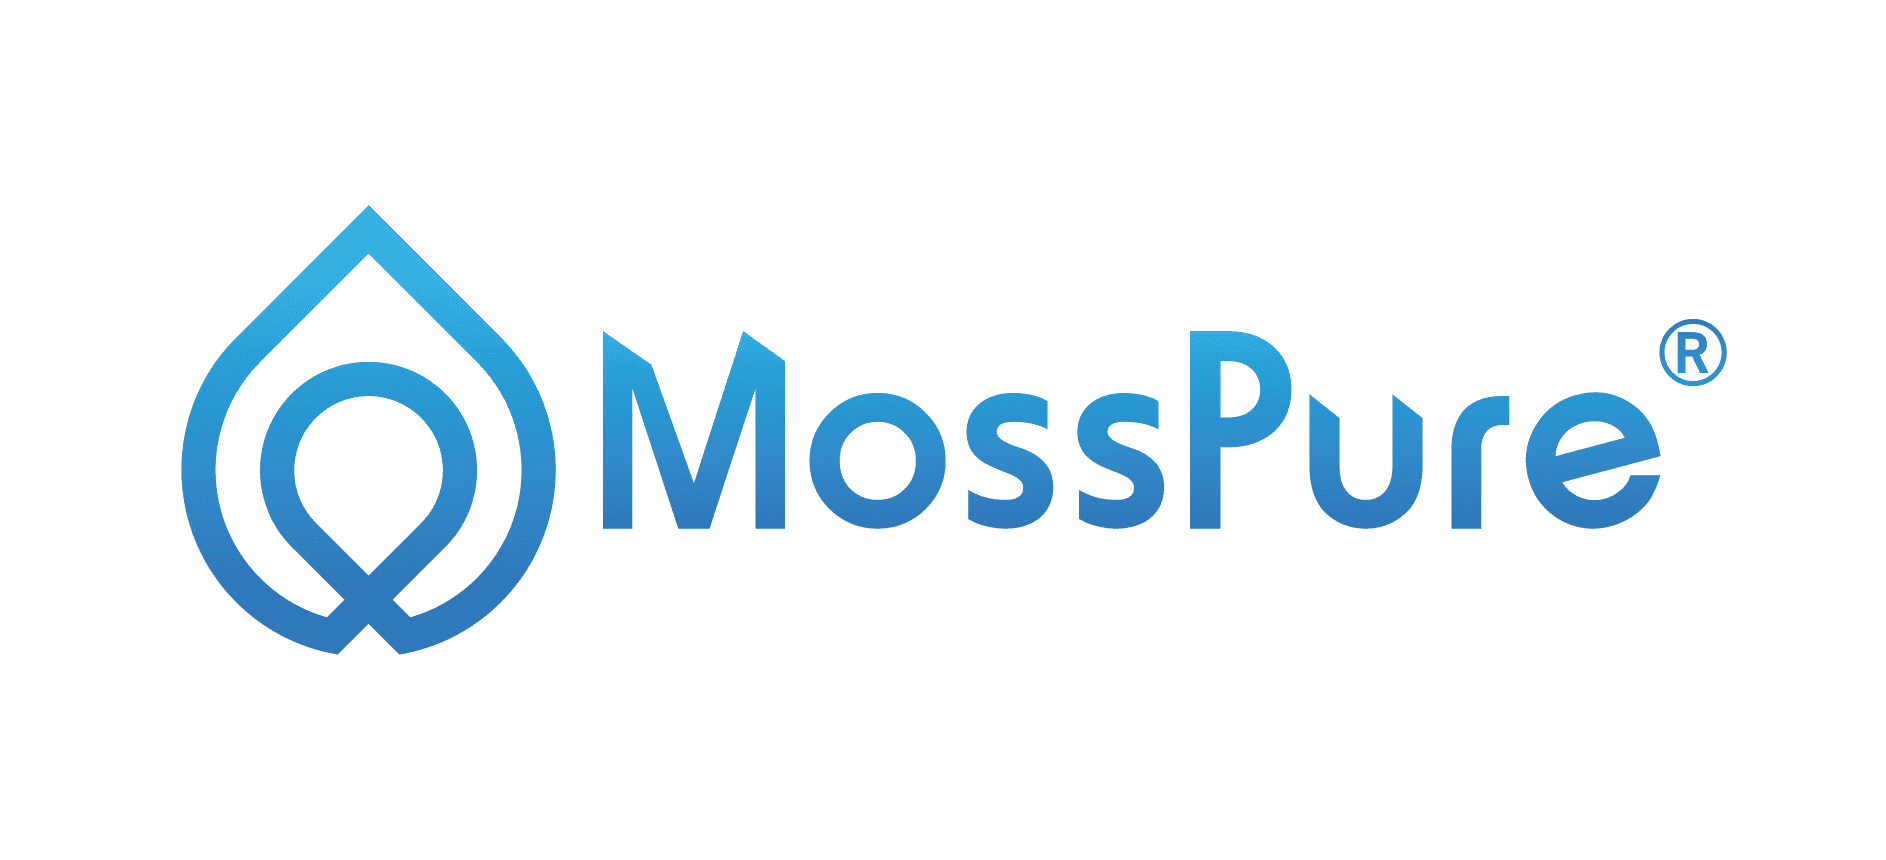 Moss Pure: The World's Only Live Moss Air Filter